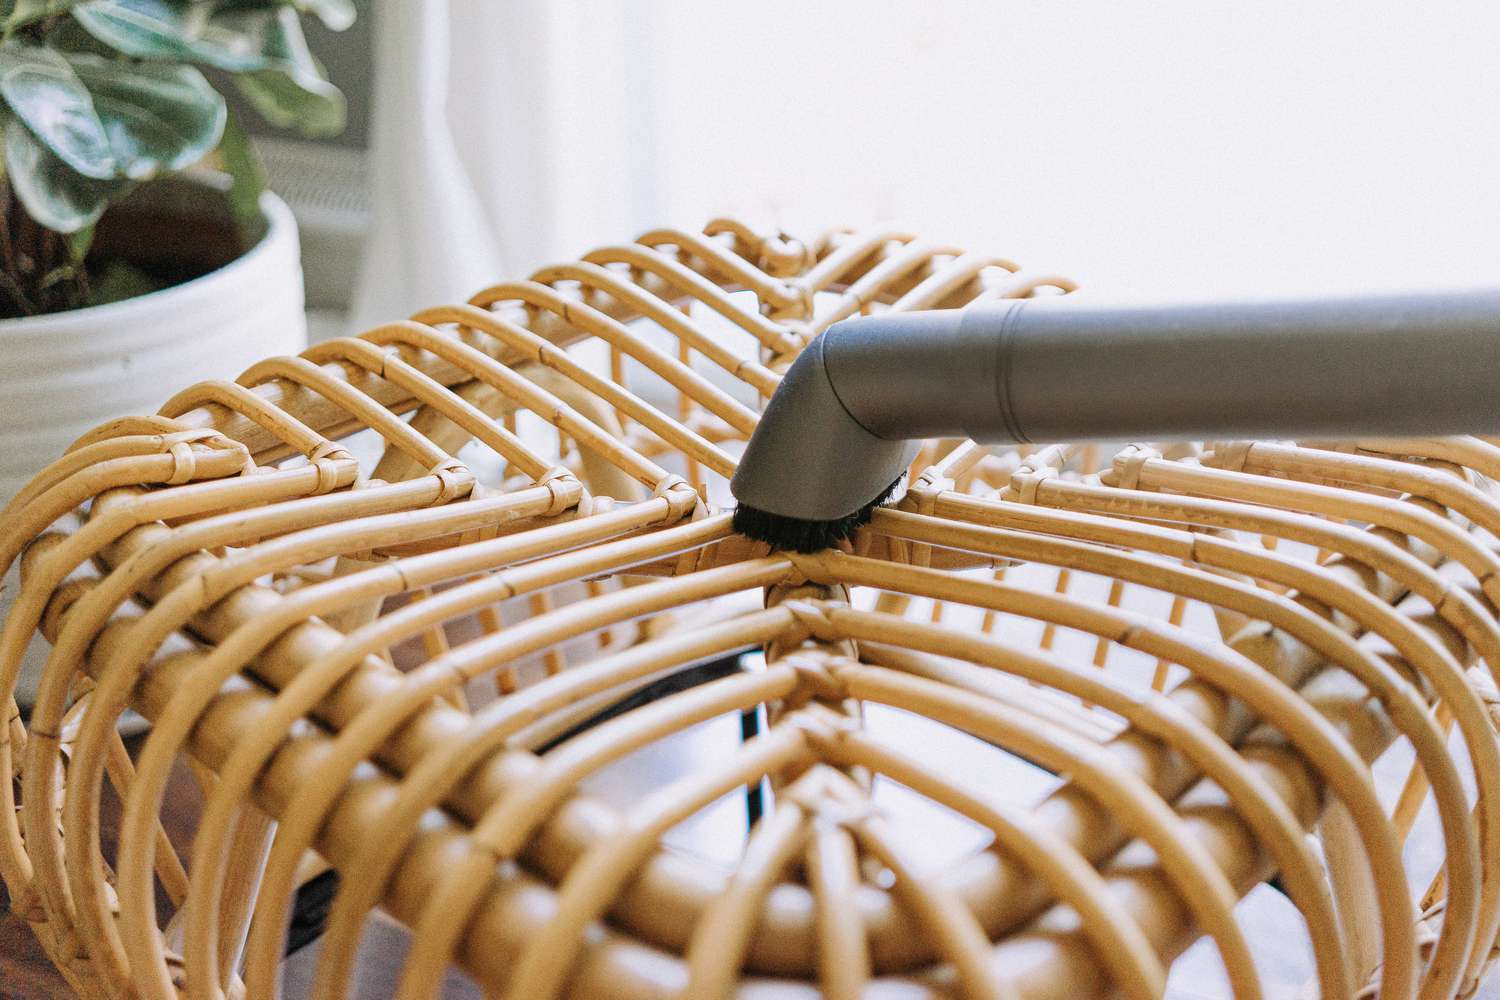 How To Clean Wicker Furniture